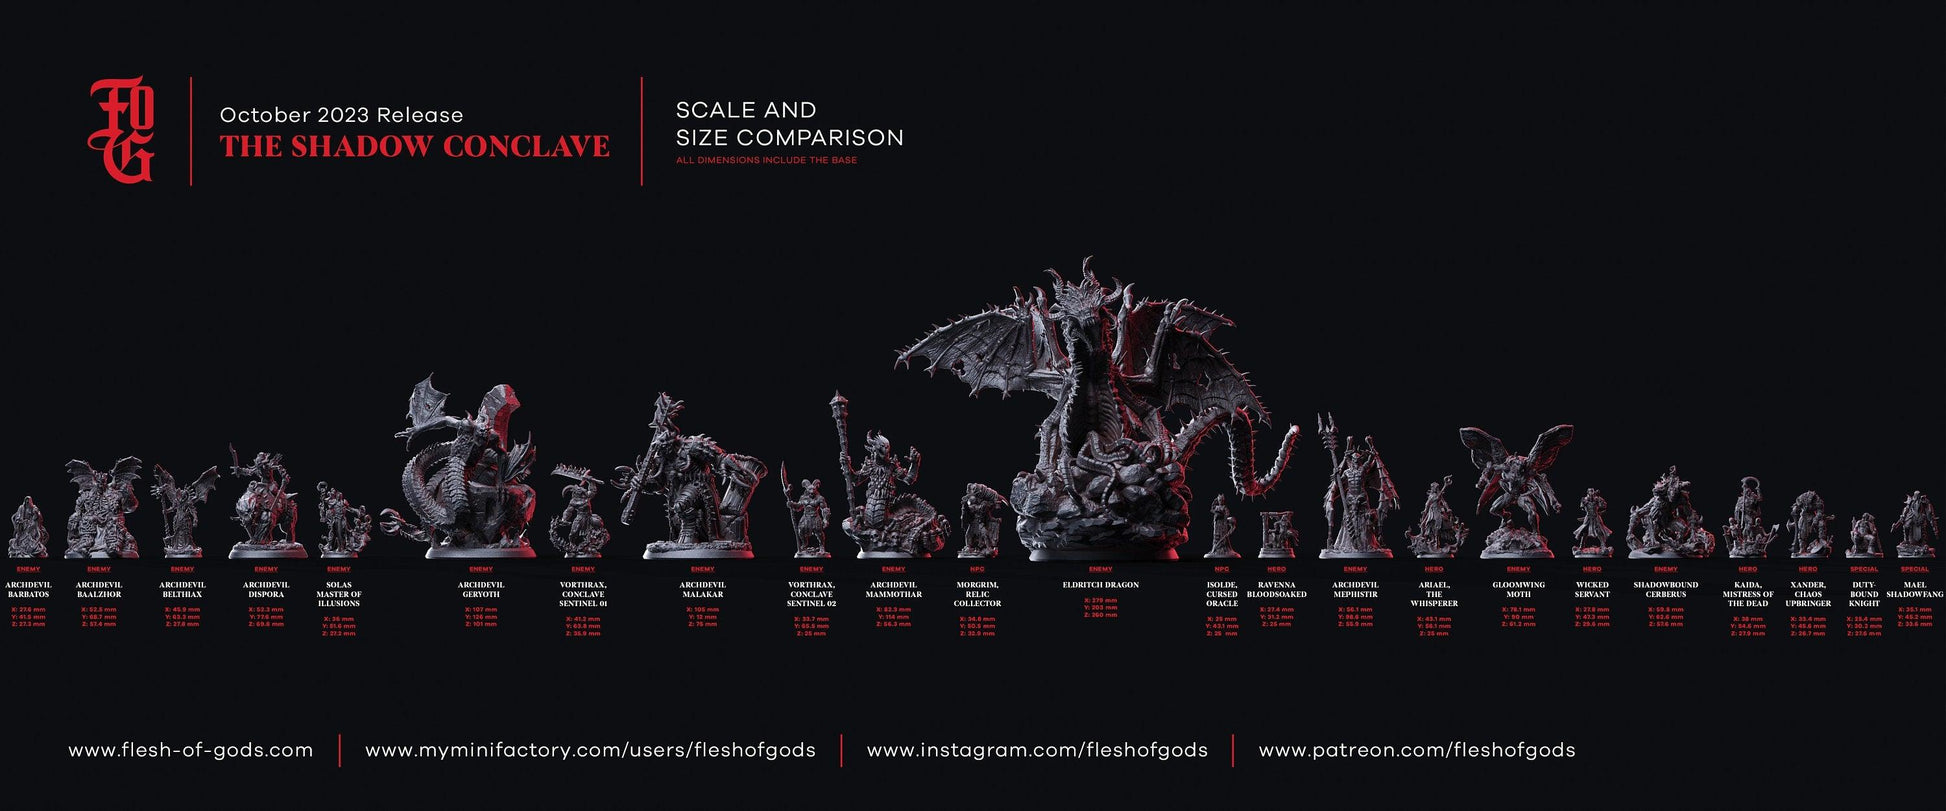 Xander, the Chaos Upbringer Miniature | A Half-Demon Fighter for Epic Tabletop Adventures | 32mm Scale or 75mm Scale - Plague Miniatures shop for DnD Miniatures